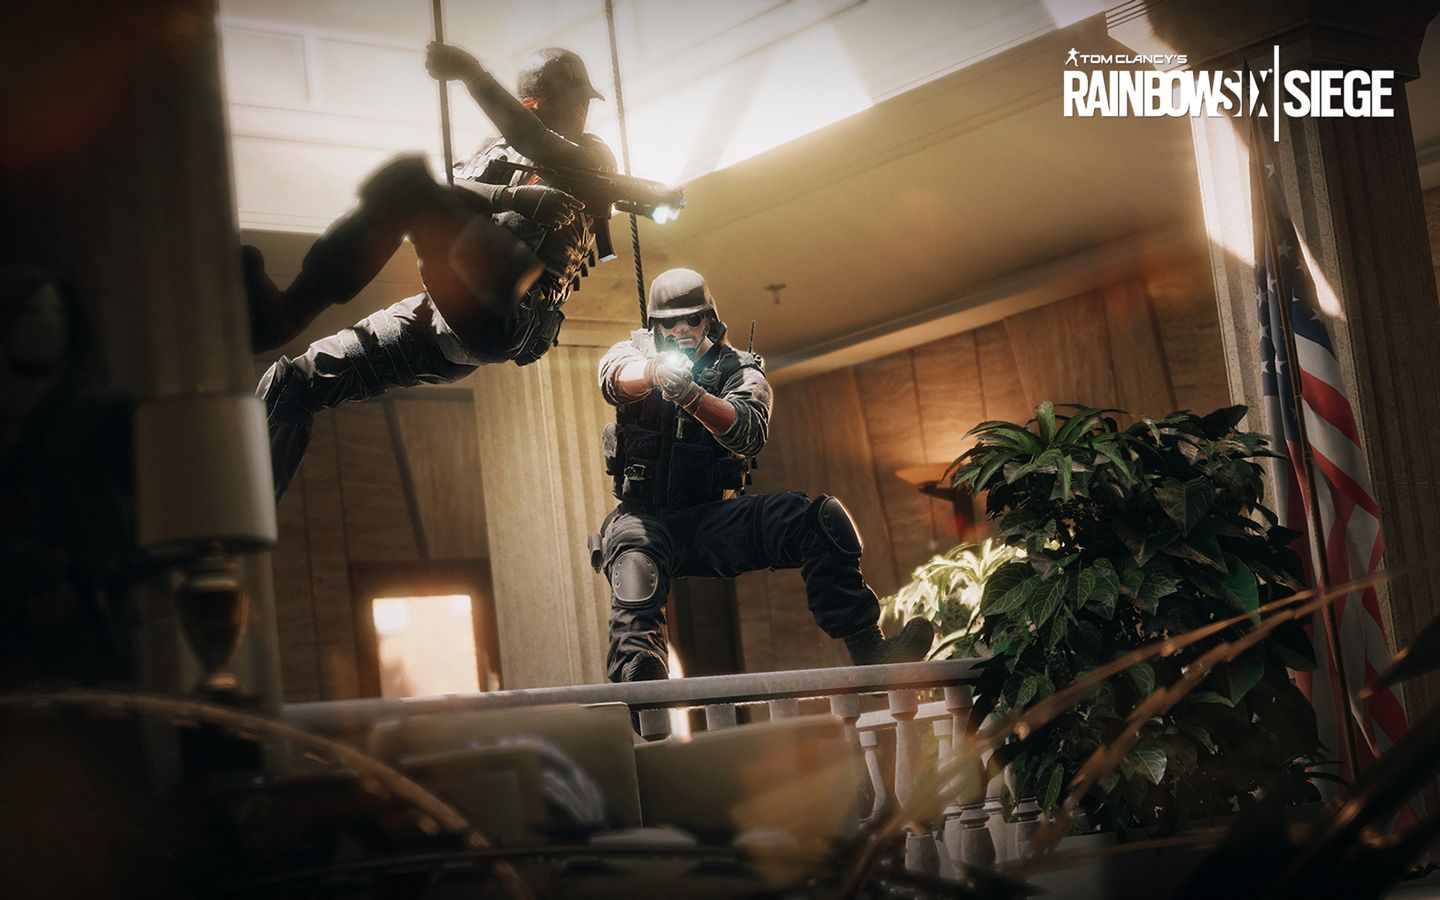 Free download Rainbow Six Siege Wallpaper in 1440x900 [1440x900] for your Desktop, Mobile & Tablet. Explore Rainbow Six Siege Ash Wallpaper. Tom Clancy Wallpaper, Rainbow 6 Wallpaper, Rainbow Six Siege HD Wallpaper